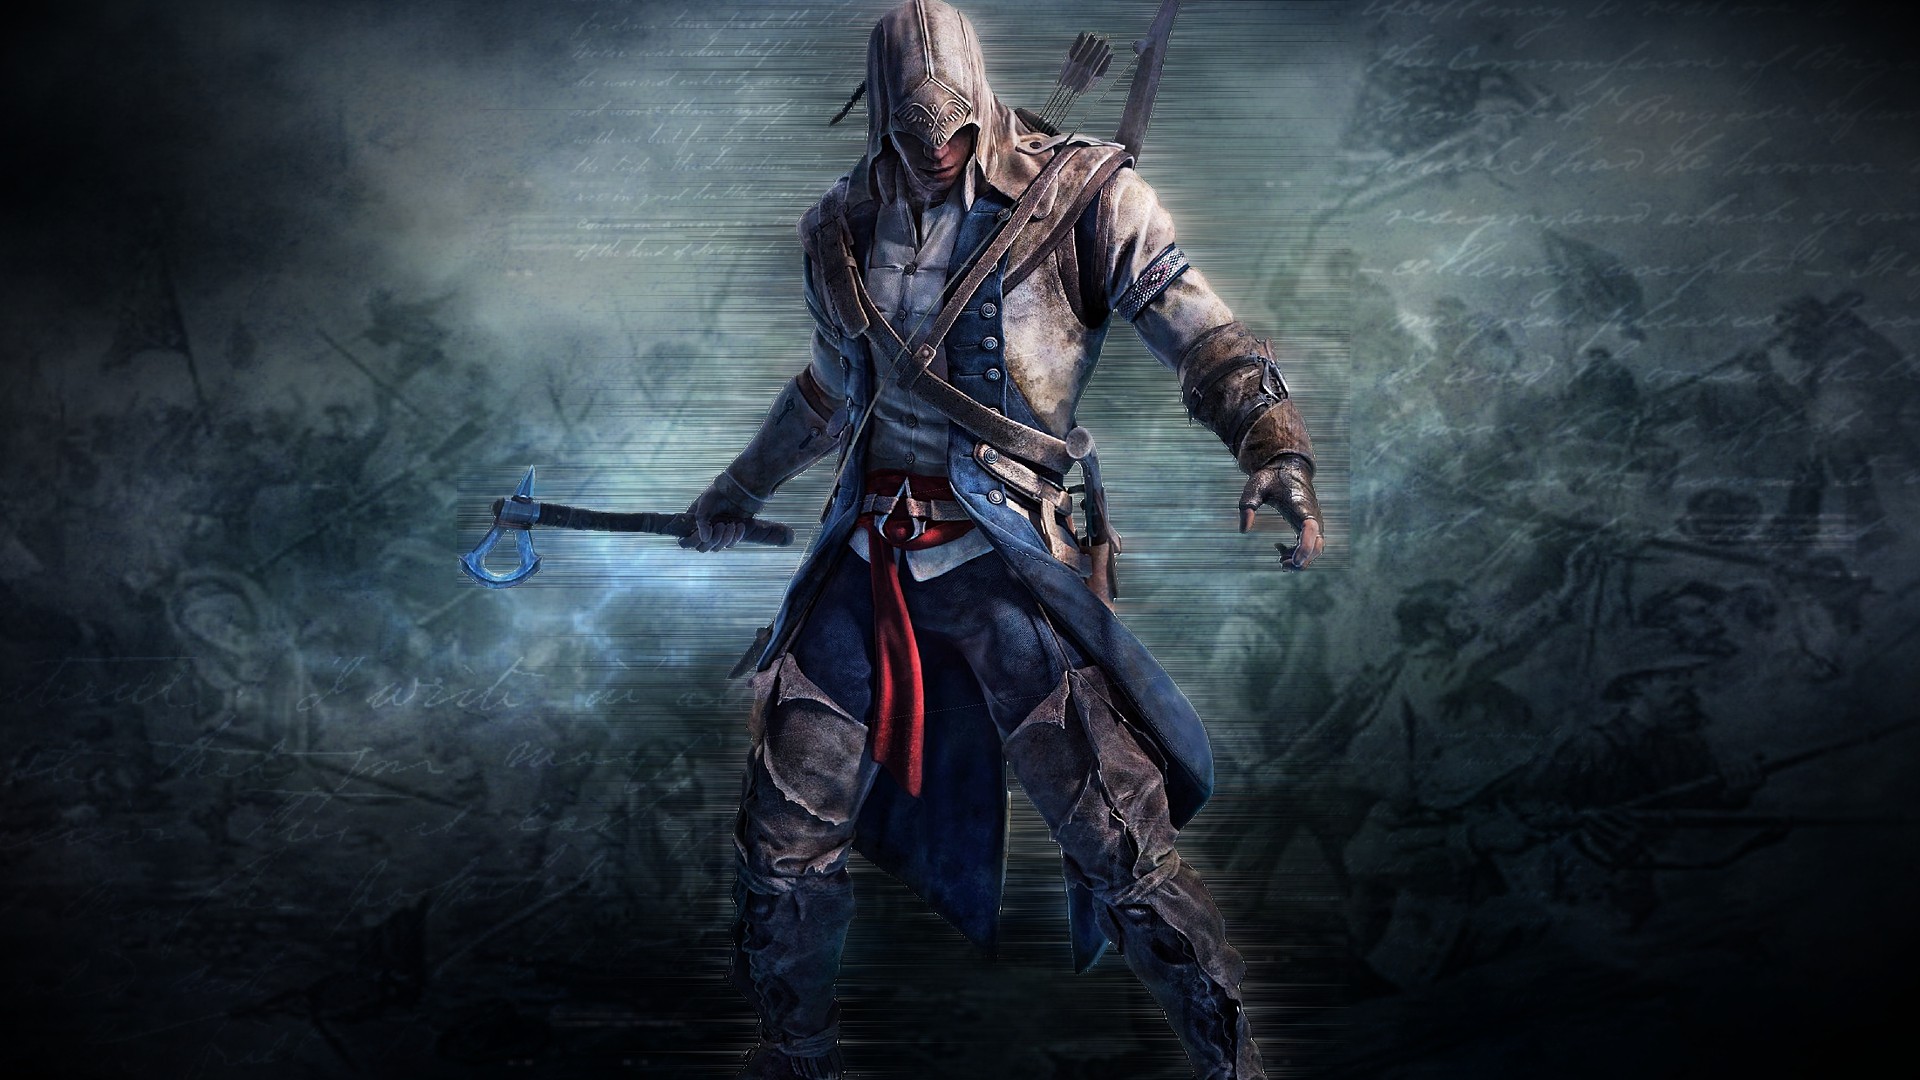 General 1920x1080 video games Assassin's Creed axes Connor Kenway artwork Assassins Creed: Liberation video game art fantasy art